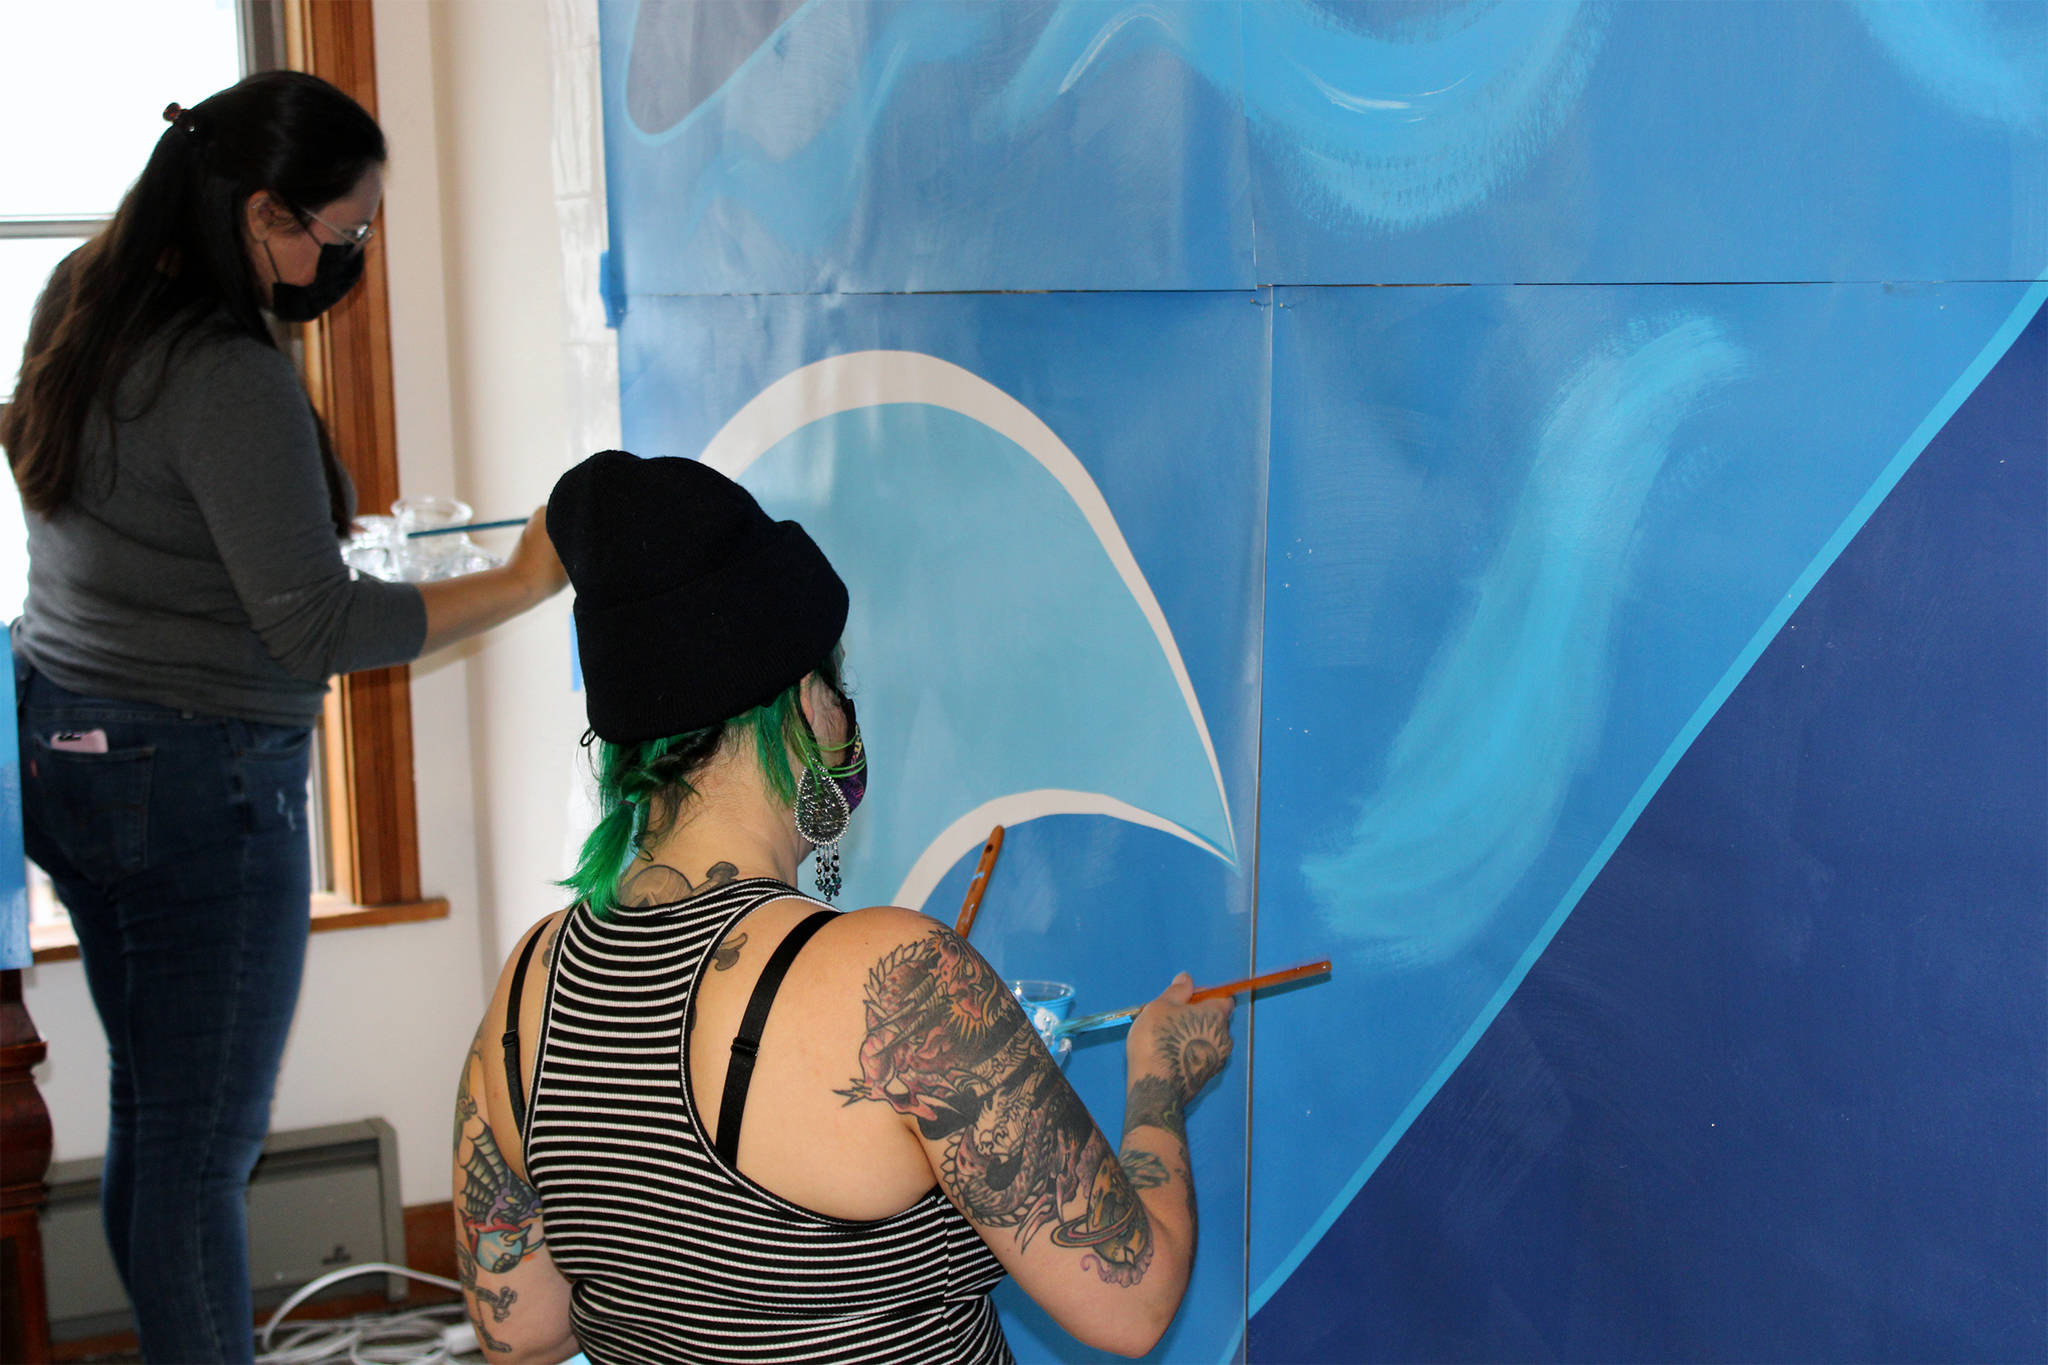 Dana Zigmund / Capital City Weekly 
Shara Kay Diamond, left, of Anchorage and Chelsea Bighorn, right, of Sante Fe, apply paint to a section of a mural that will depict Elizabeth Kaaxgal.aat Peratrovich, a Tlingit civil rights icon. The mural is the work of Tlingit and Athabascan artist, designer, and activist Crystal Kaakeeyaa Worl. Kay Diamond and Bighorn are apprentices on the project. Right, local artist Crystal Kaakeeyaa Worl, center, and her apprentices, Shara Kay Diamond, left, and Chelsea Bighorn, right, assemble sections of the mural to apply paint in Worl’s downtown studio on Aug. 10.